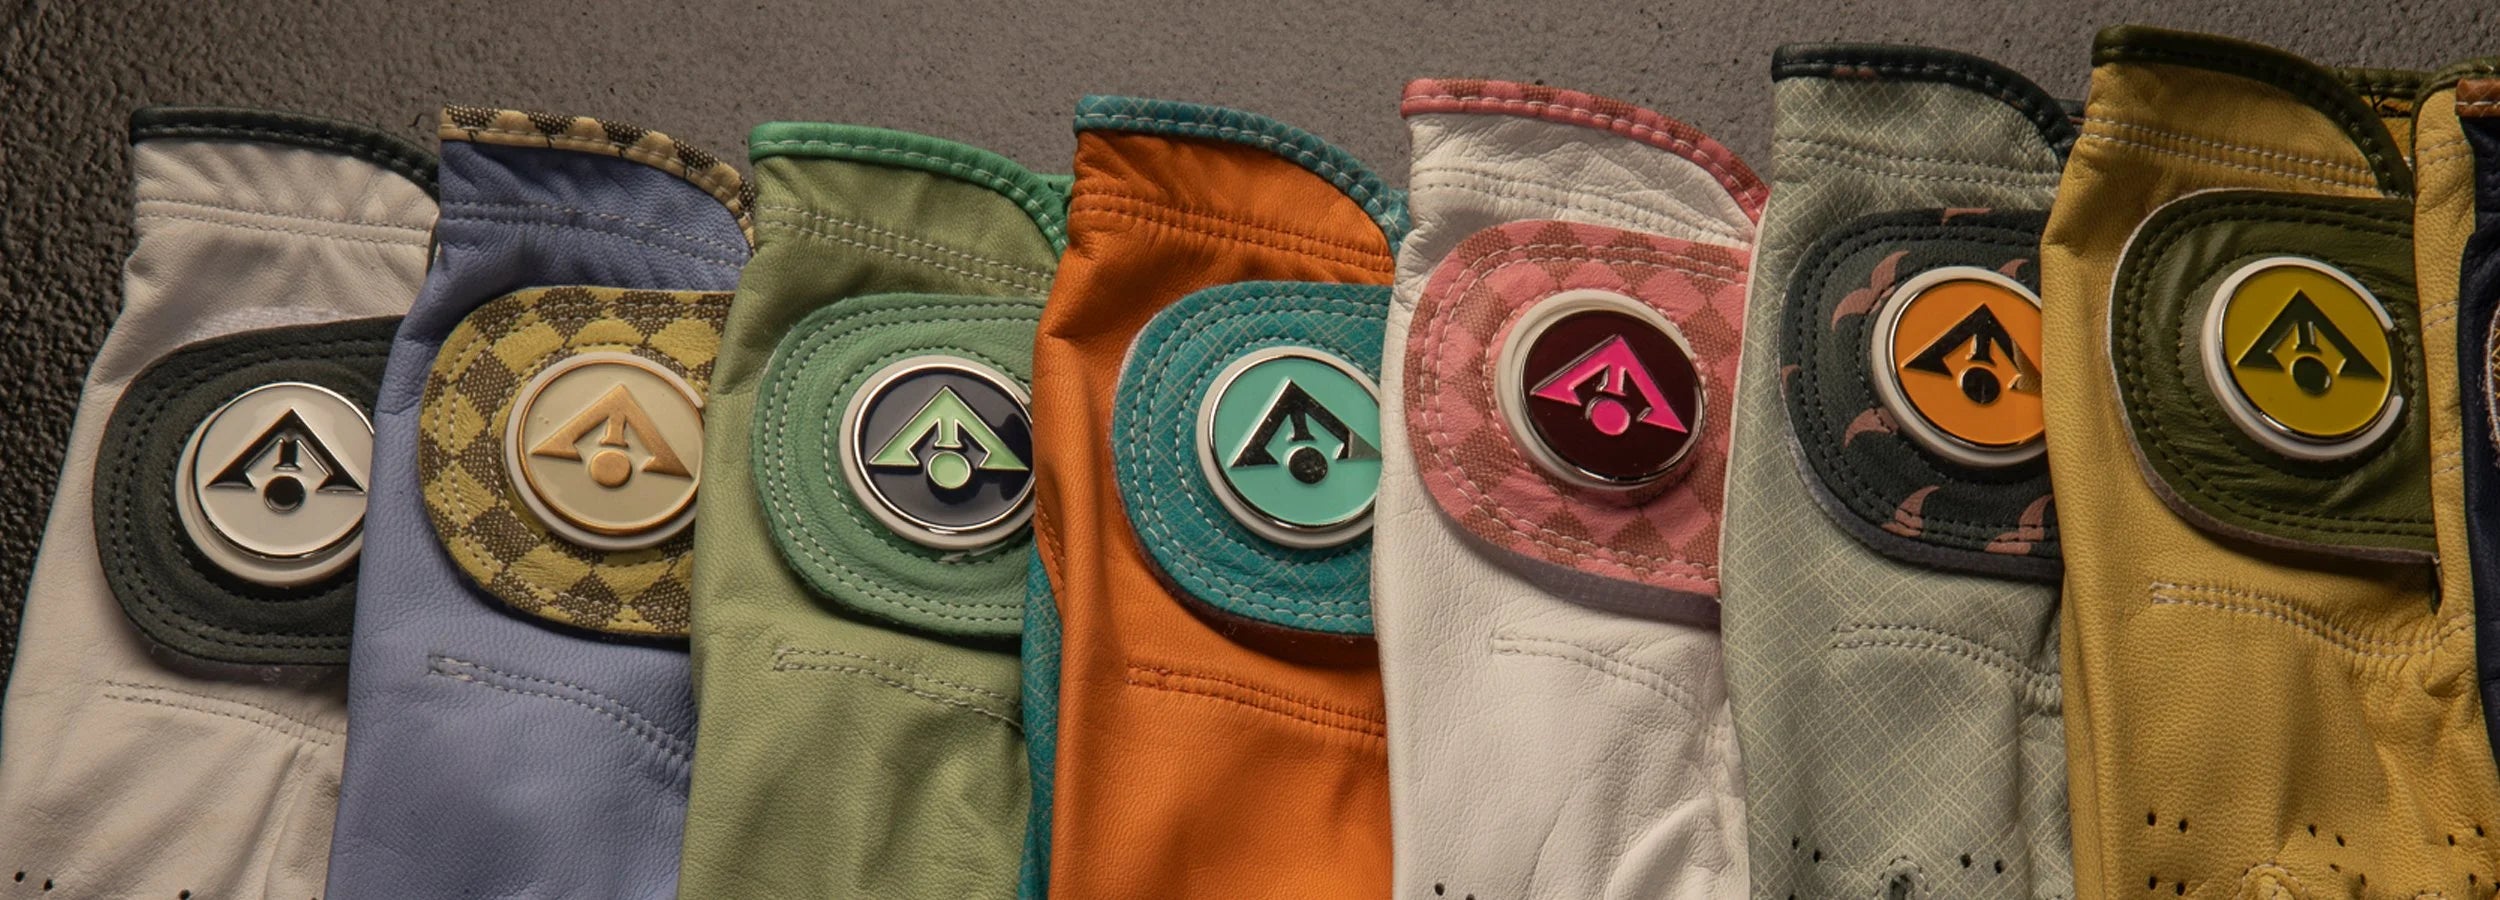 Unique golf gloves with ball markers laid out across each other in various colors and styles, showing the uniqueness of each design.